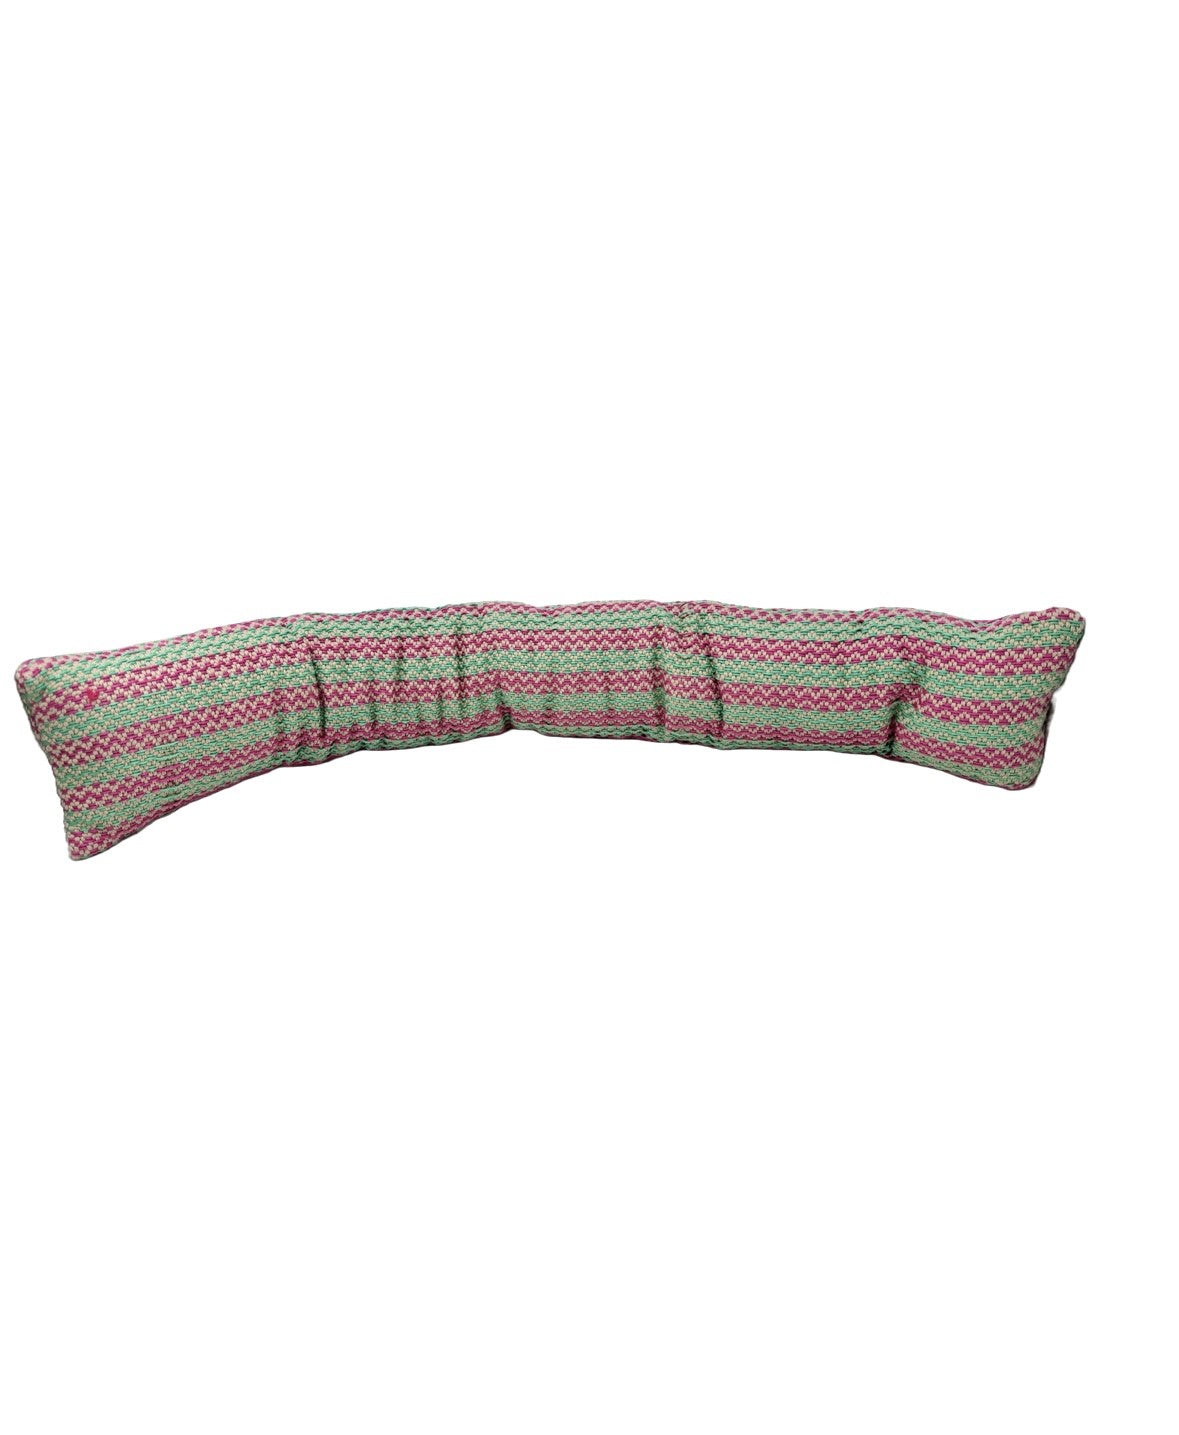 Hand-woven Draught Excluder